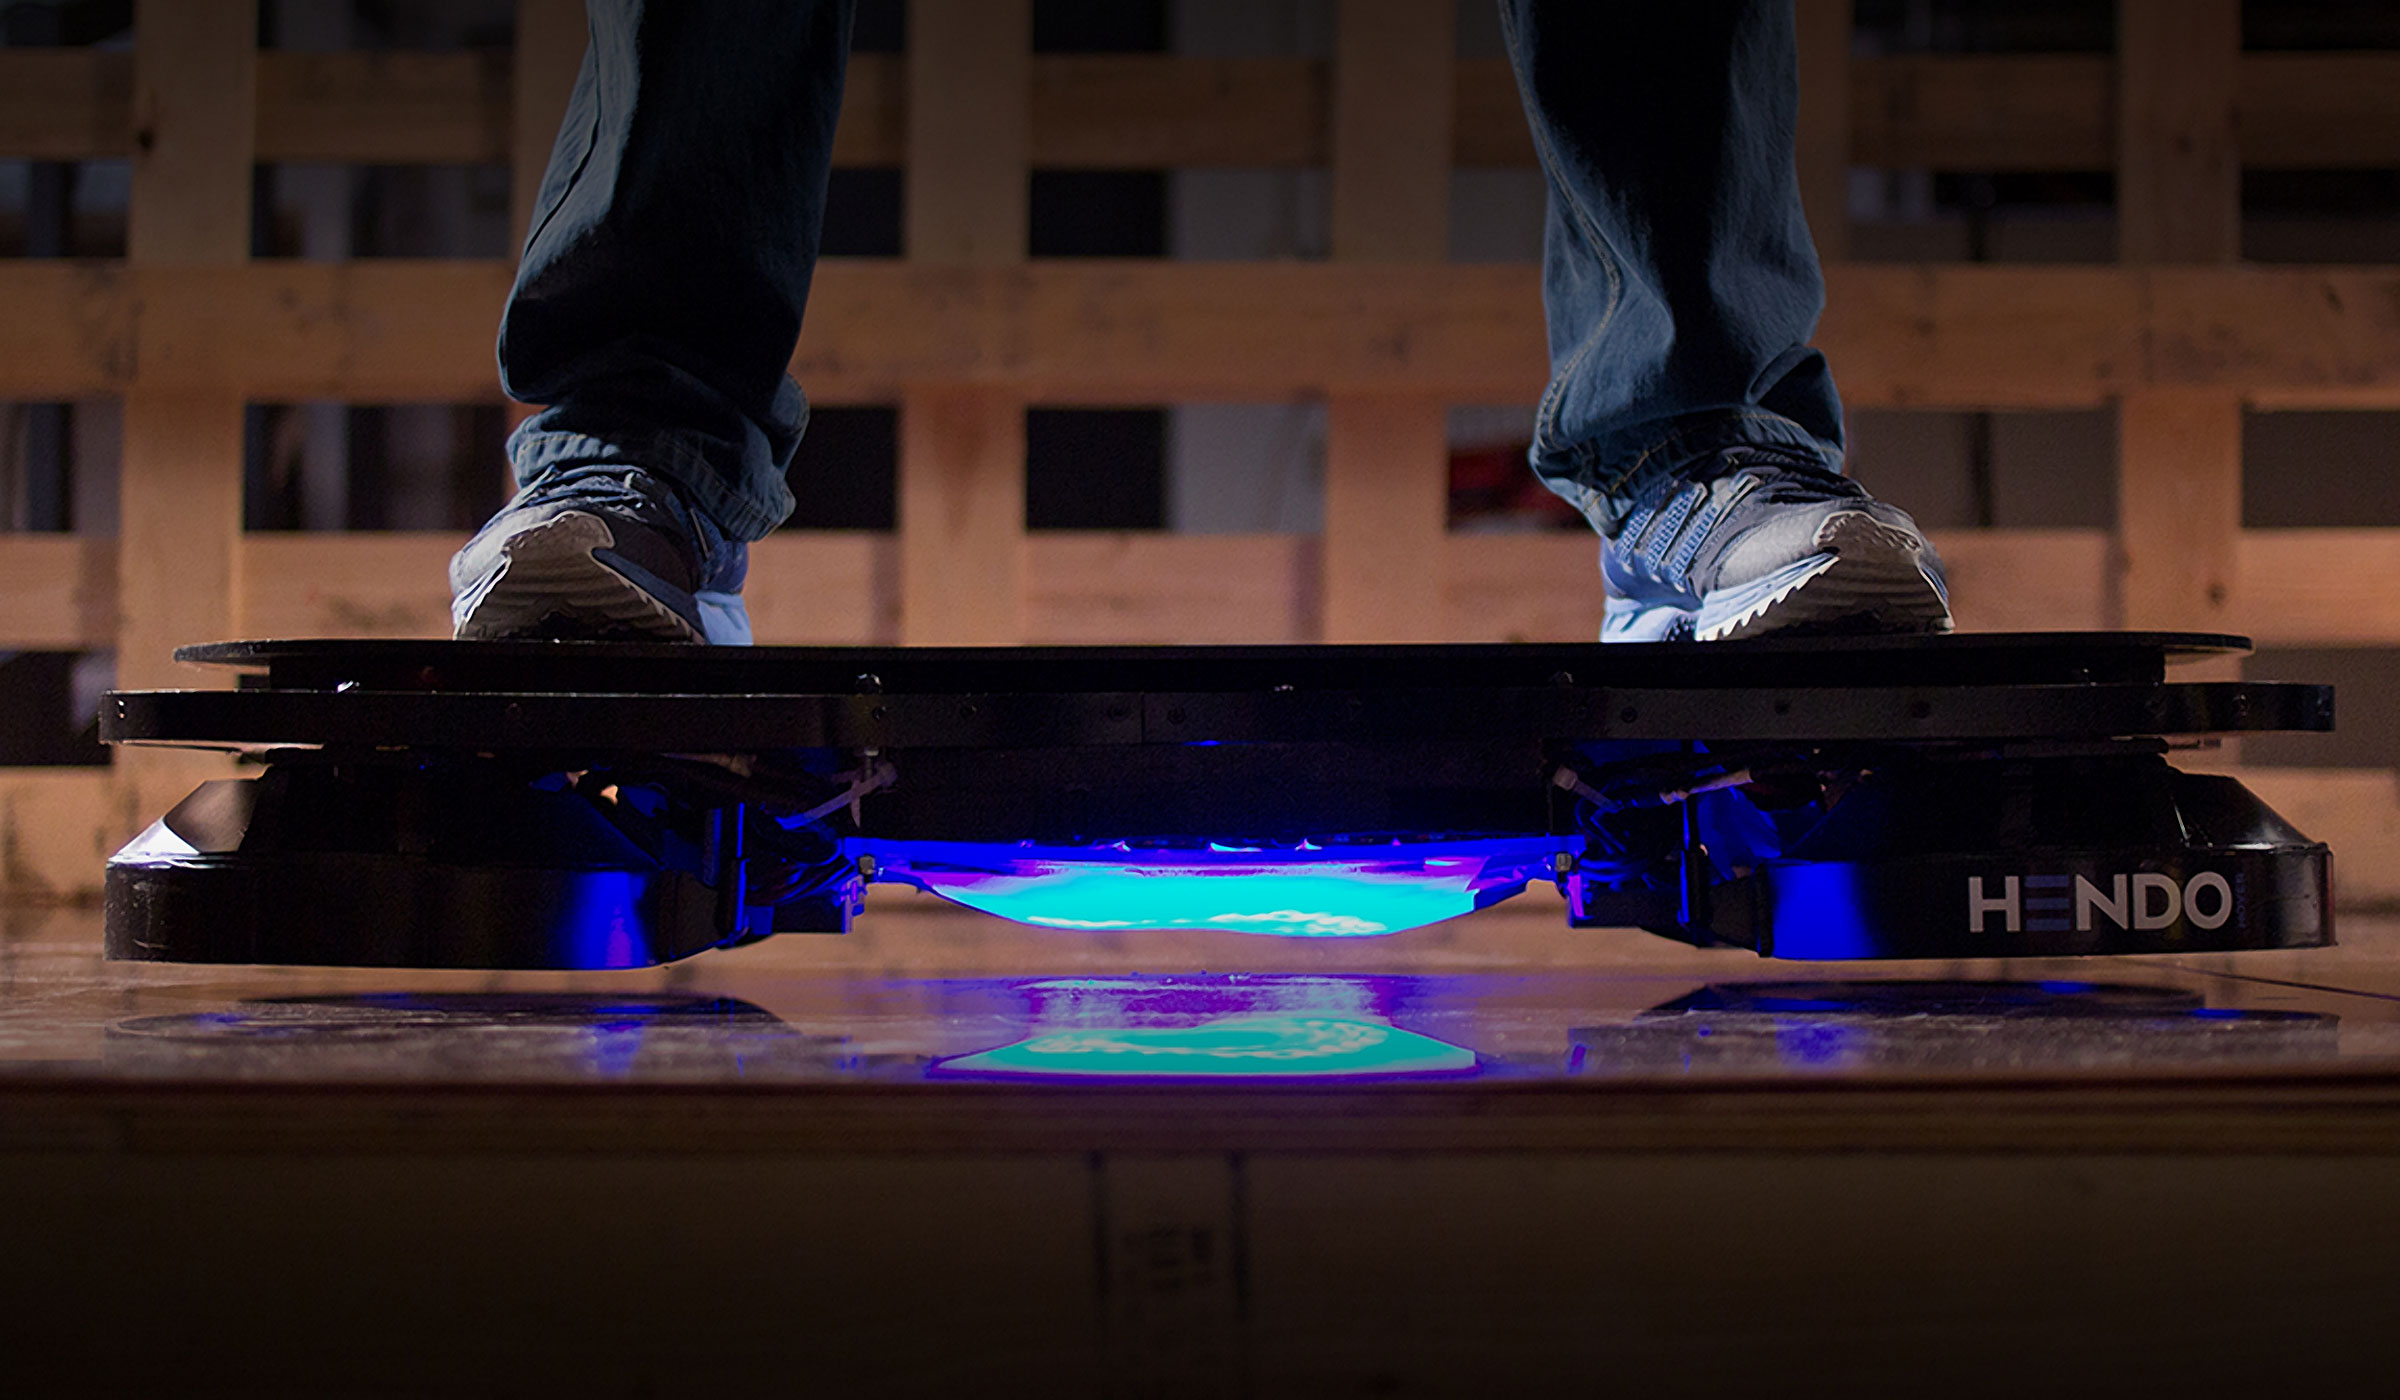 HENDO - THE WORLD’S FIRST REAL HOVERBOARD